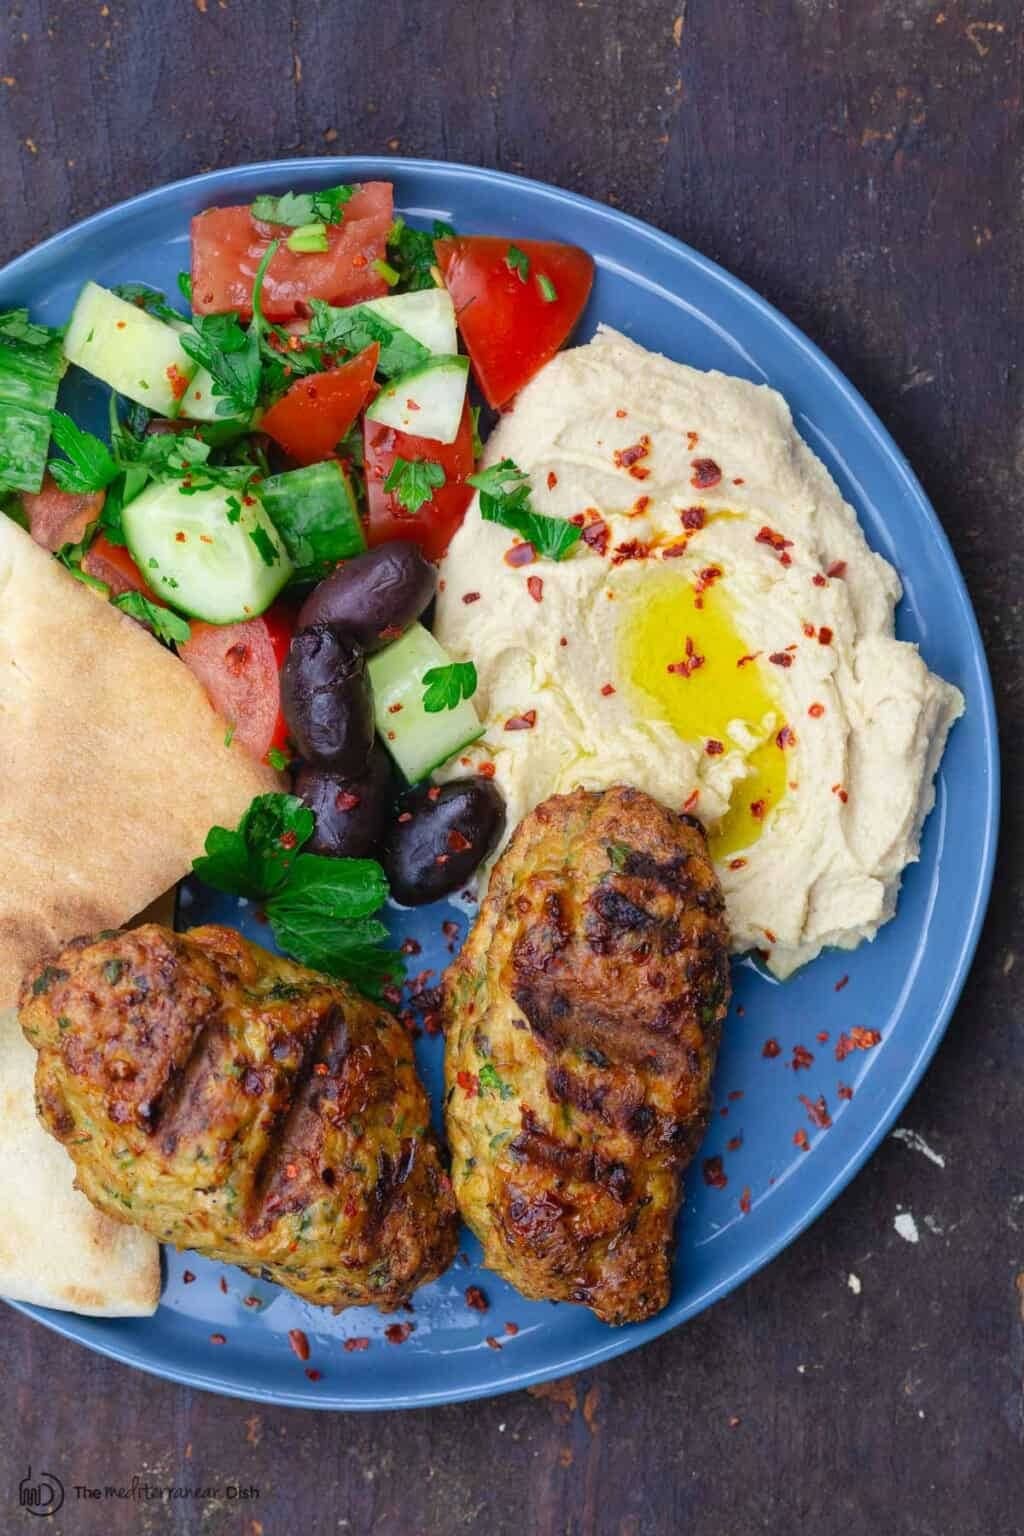 Grilled chicken kofta served with hummus, vegetable salad and feta bread.